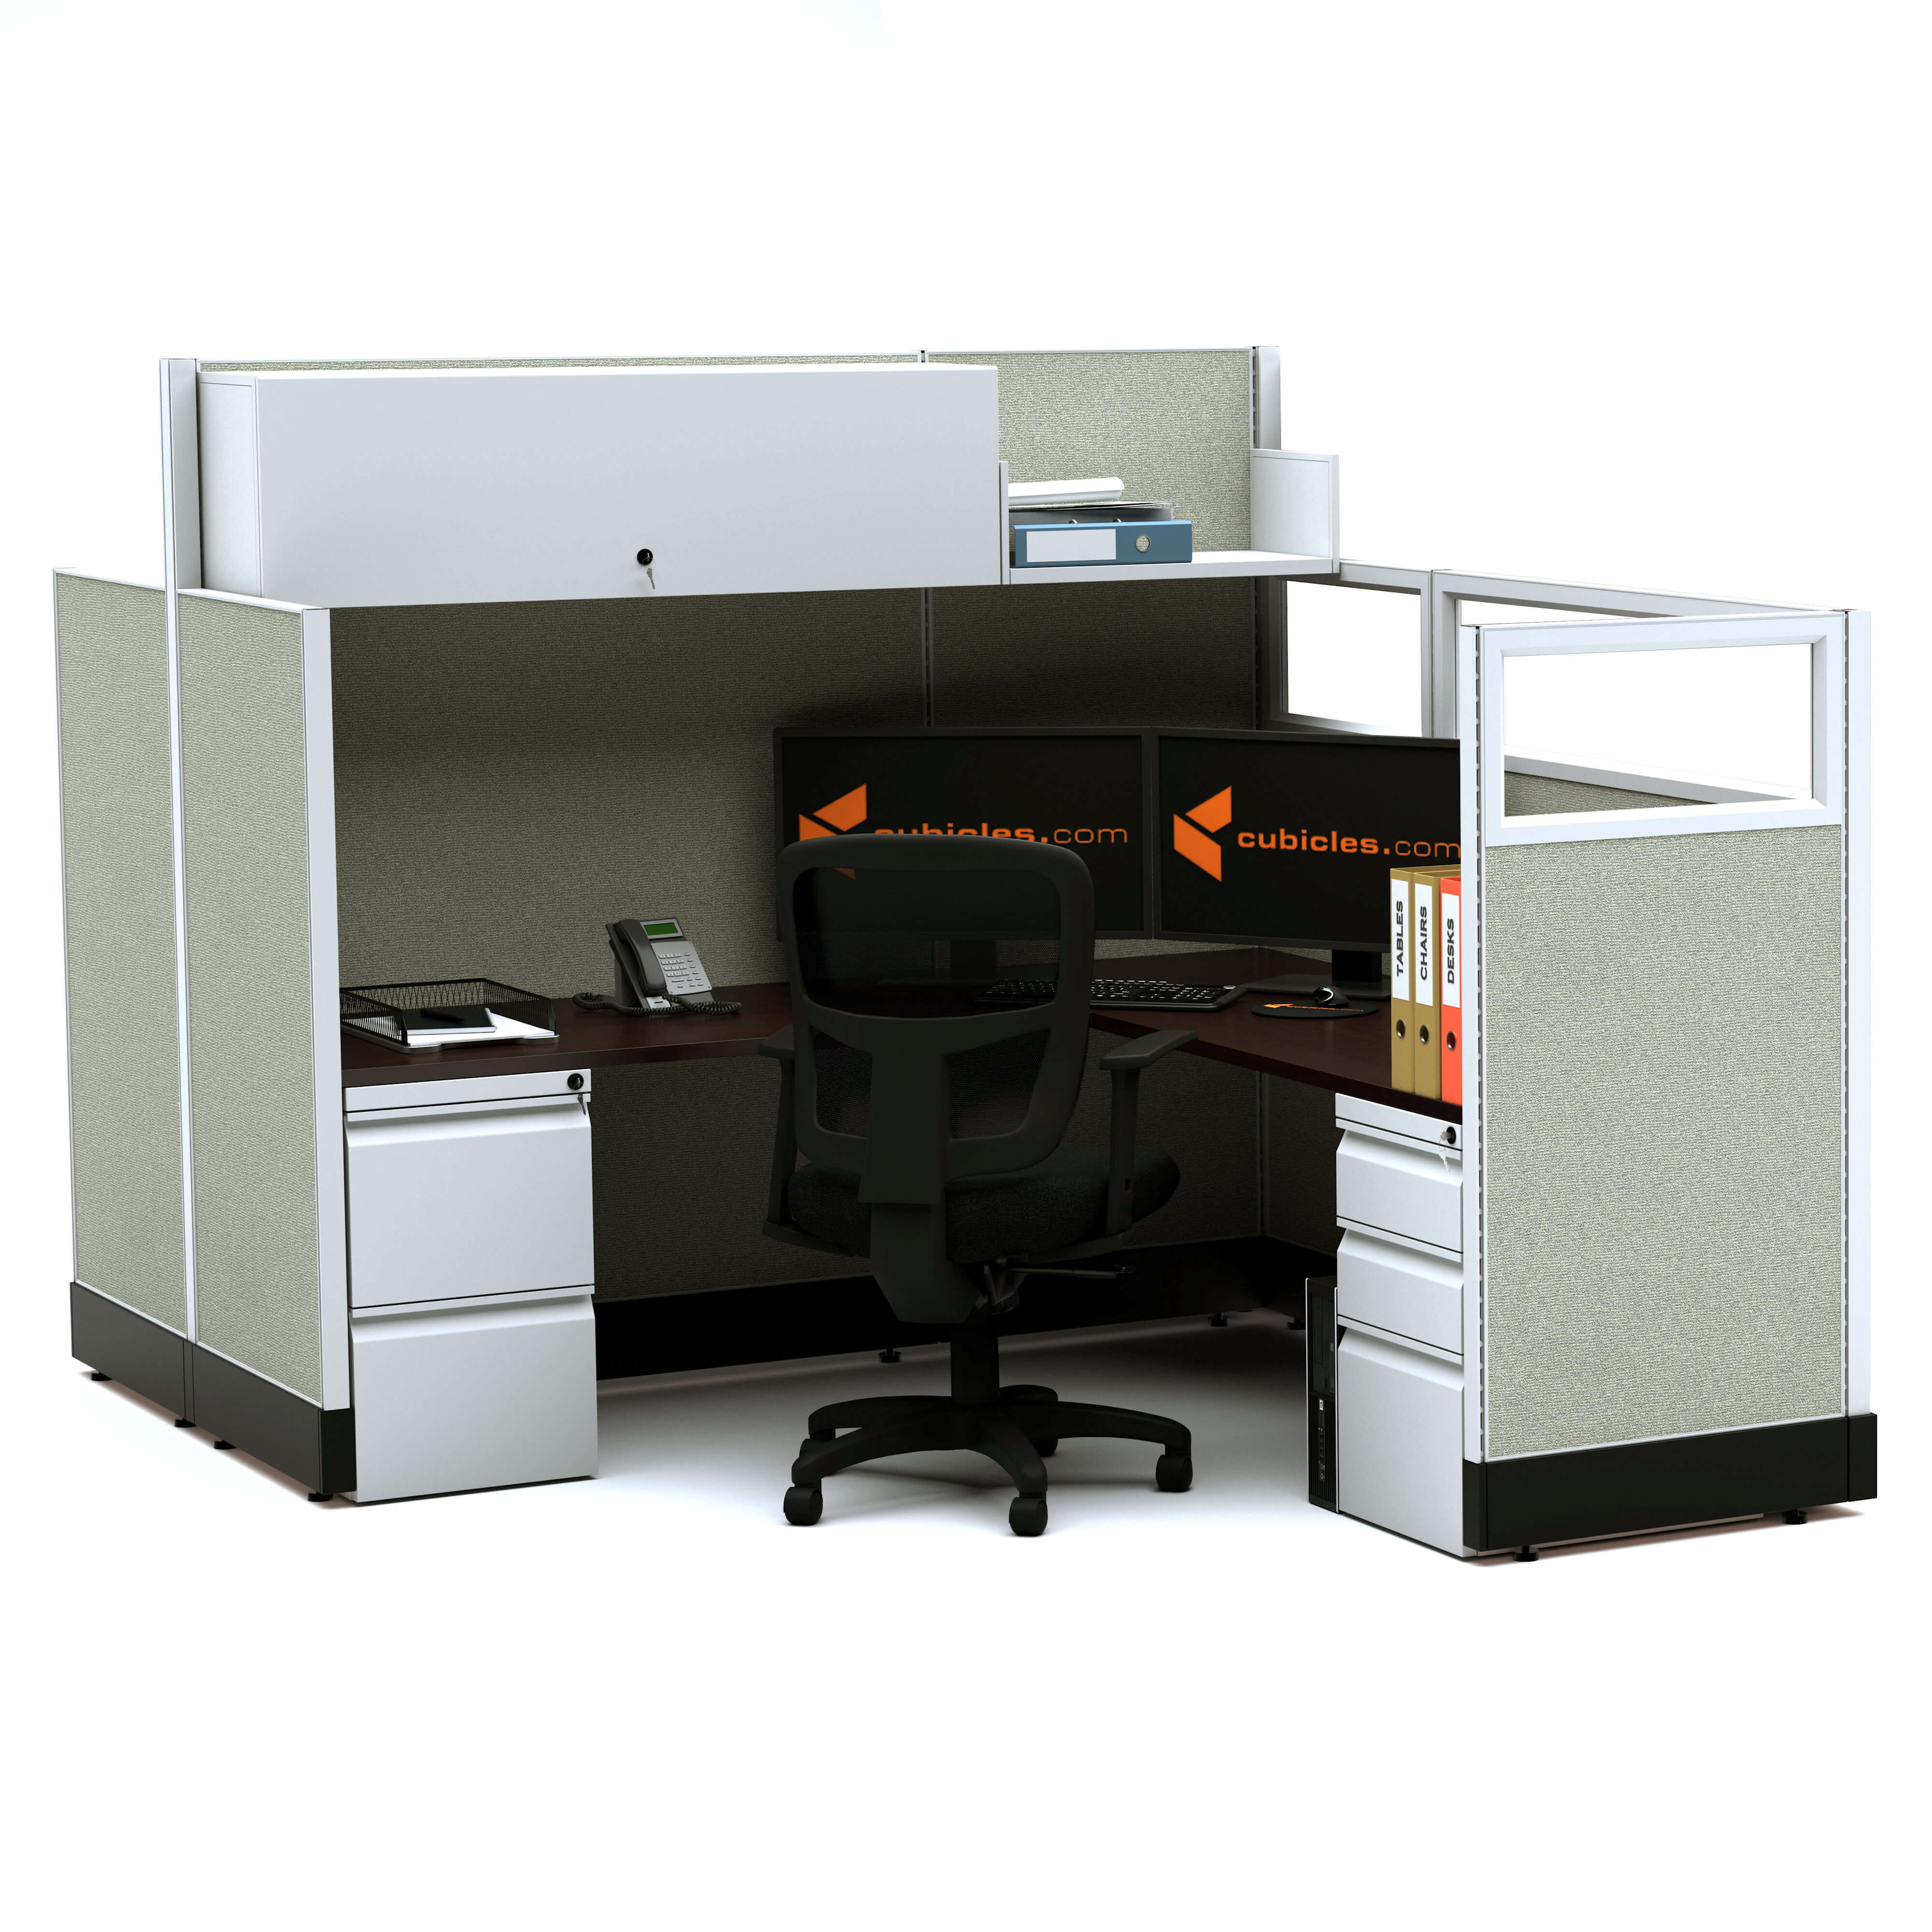 Modular office furniture partial glass office cubicles 53 67h 2pack cluster non powere